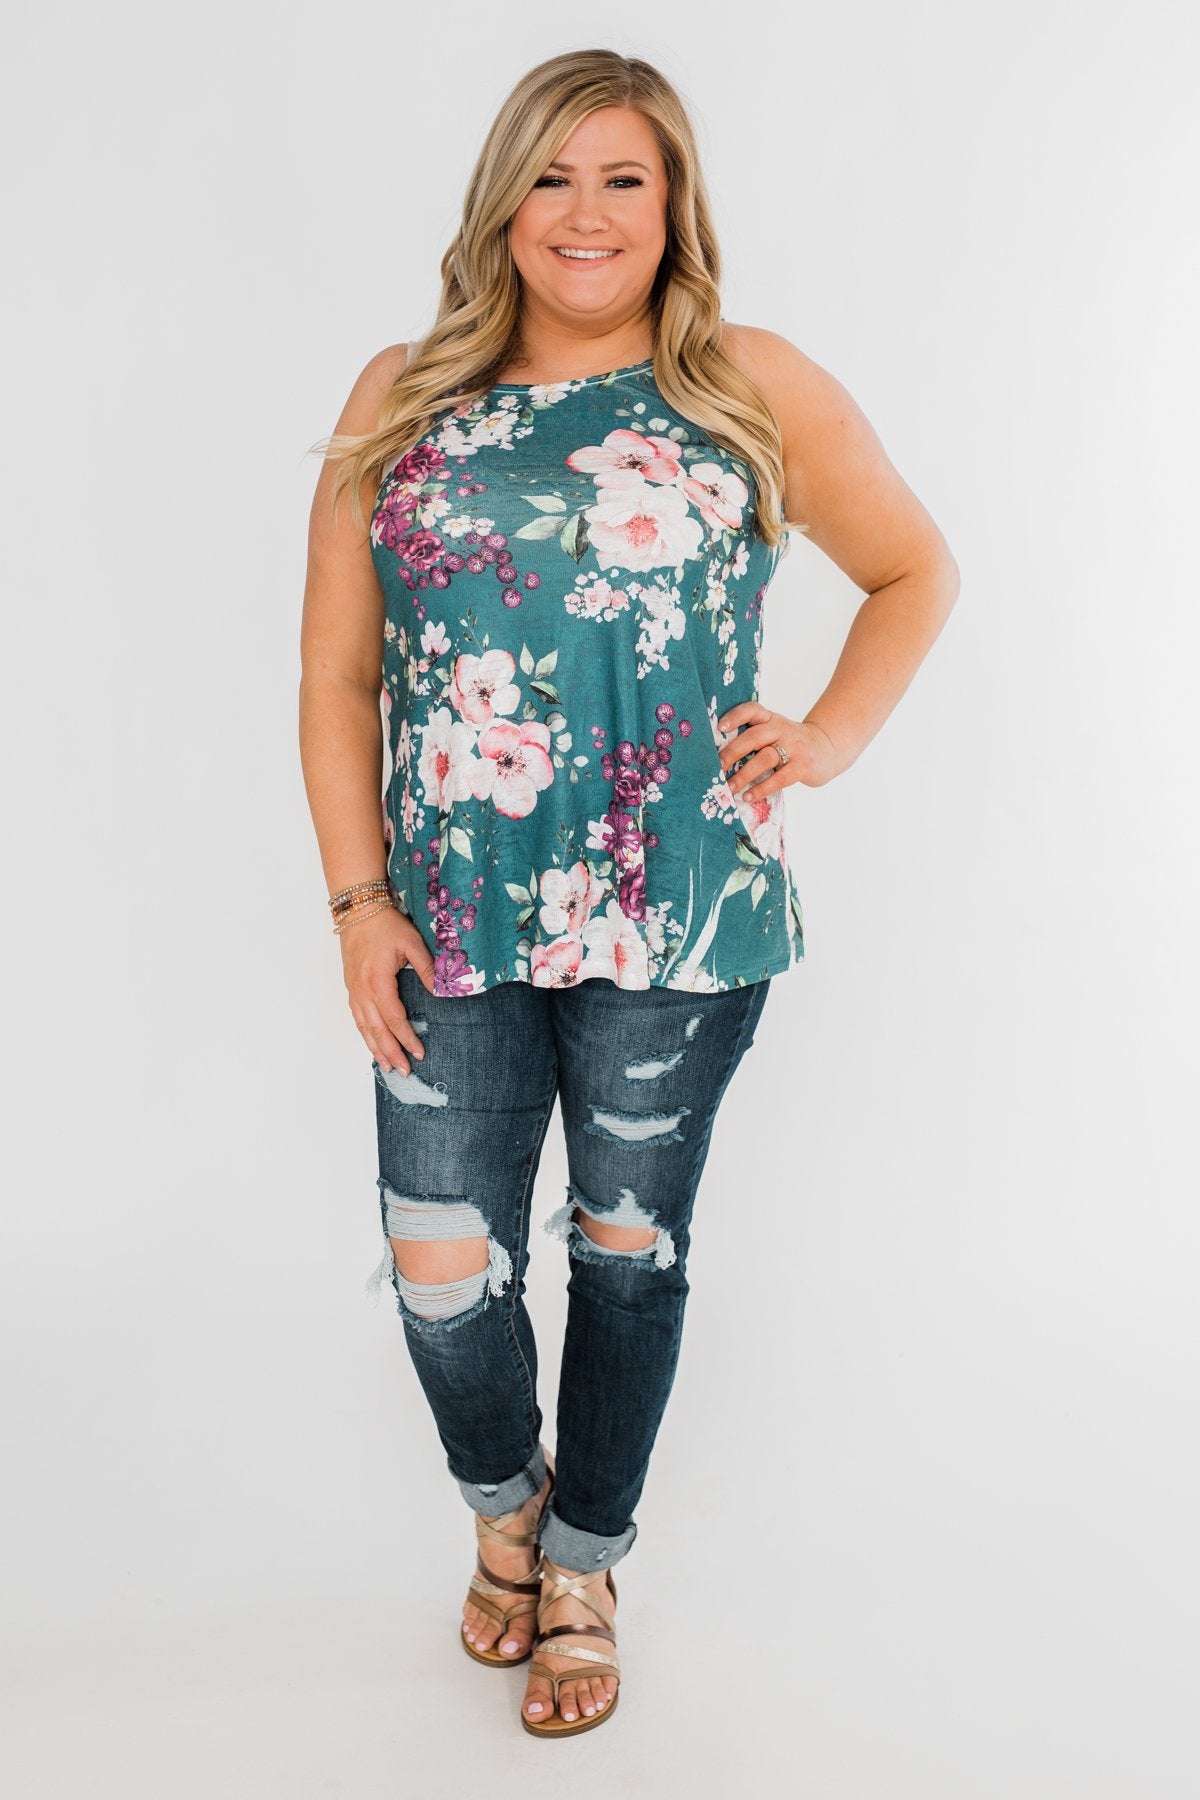 True Bliss Floral Tank Top- Dark Teal – The Pulse Boutique